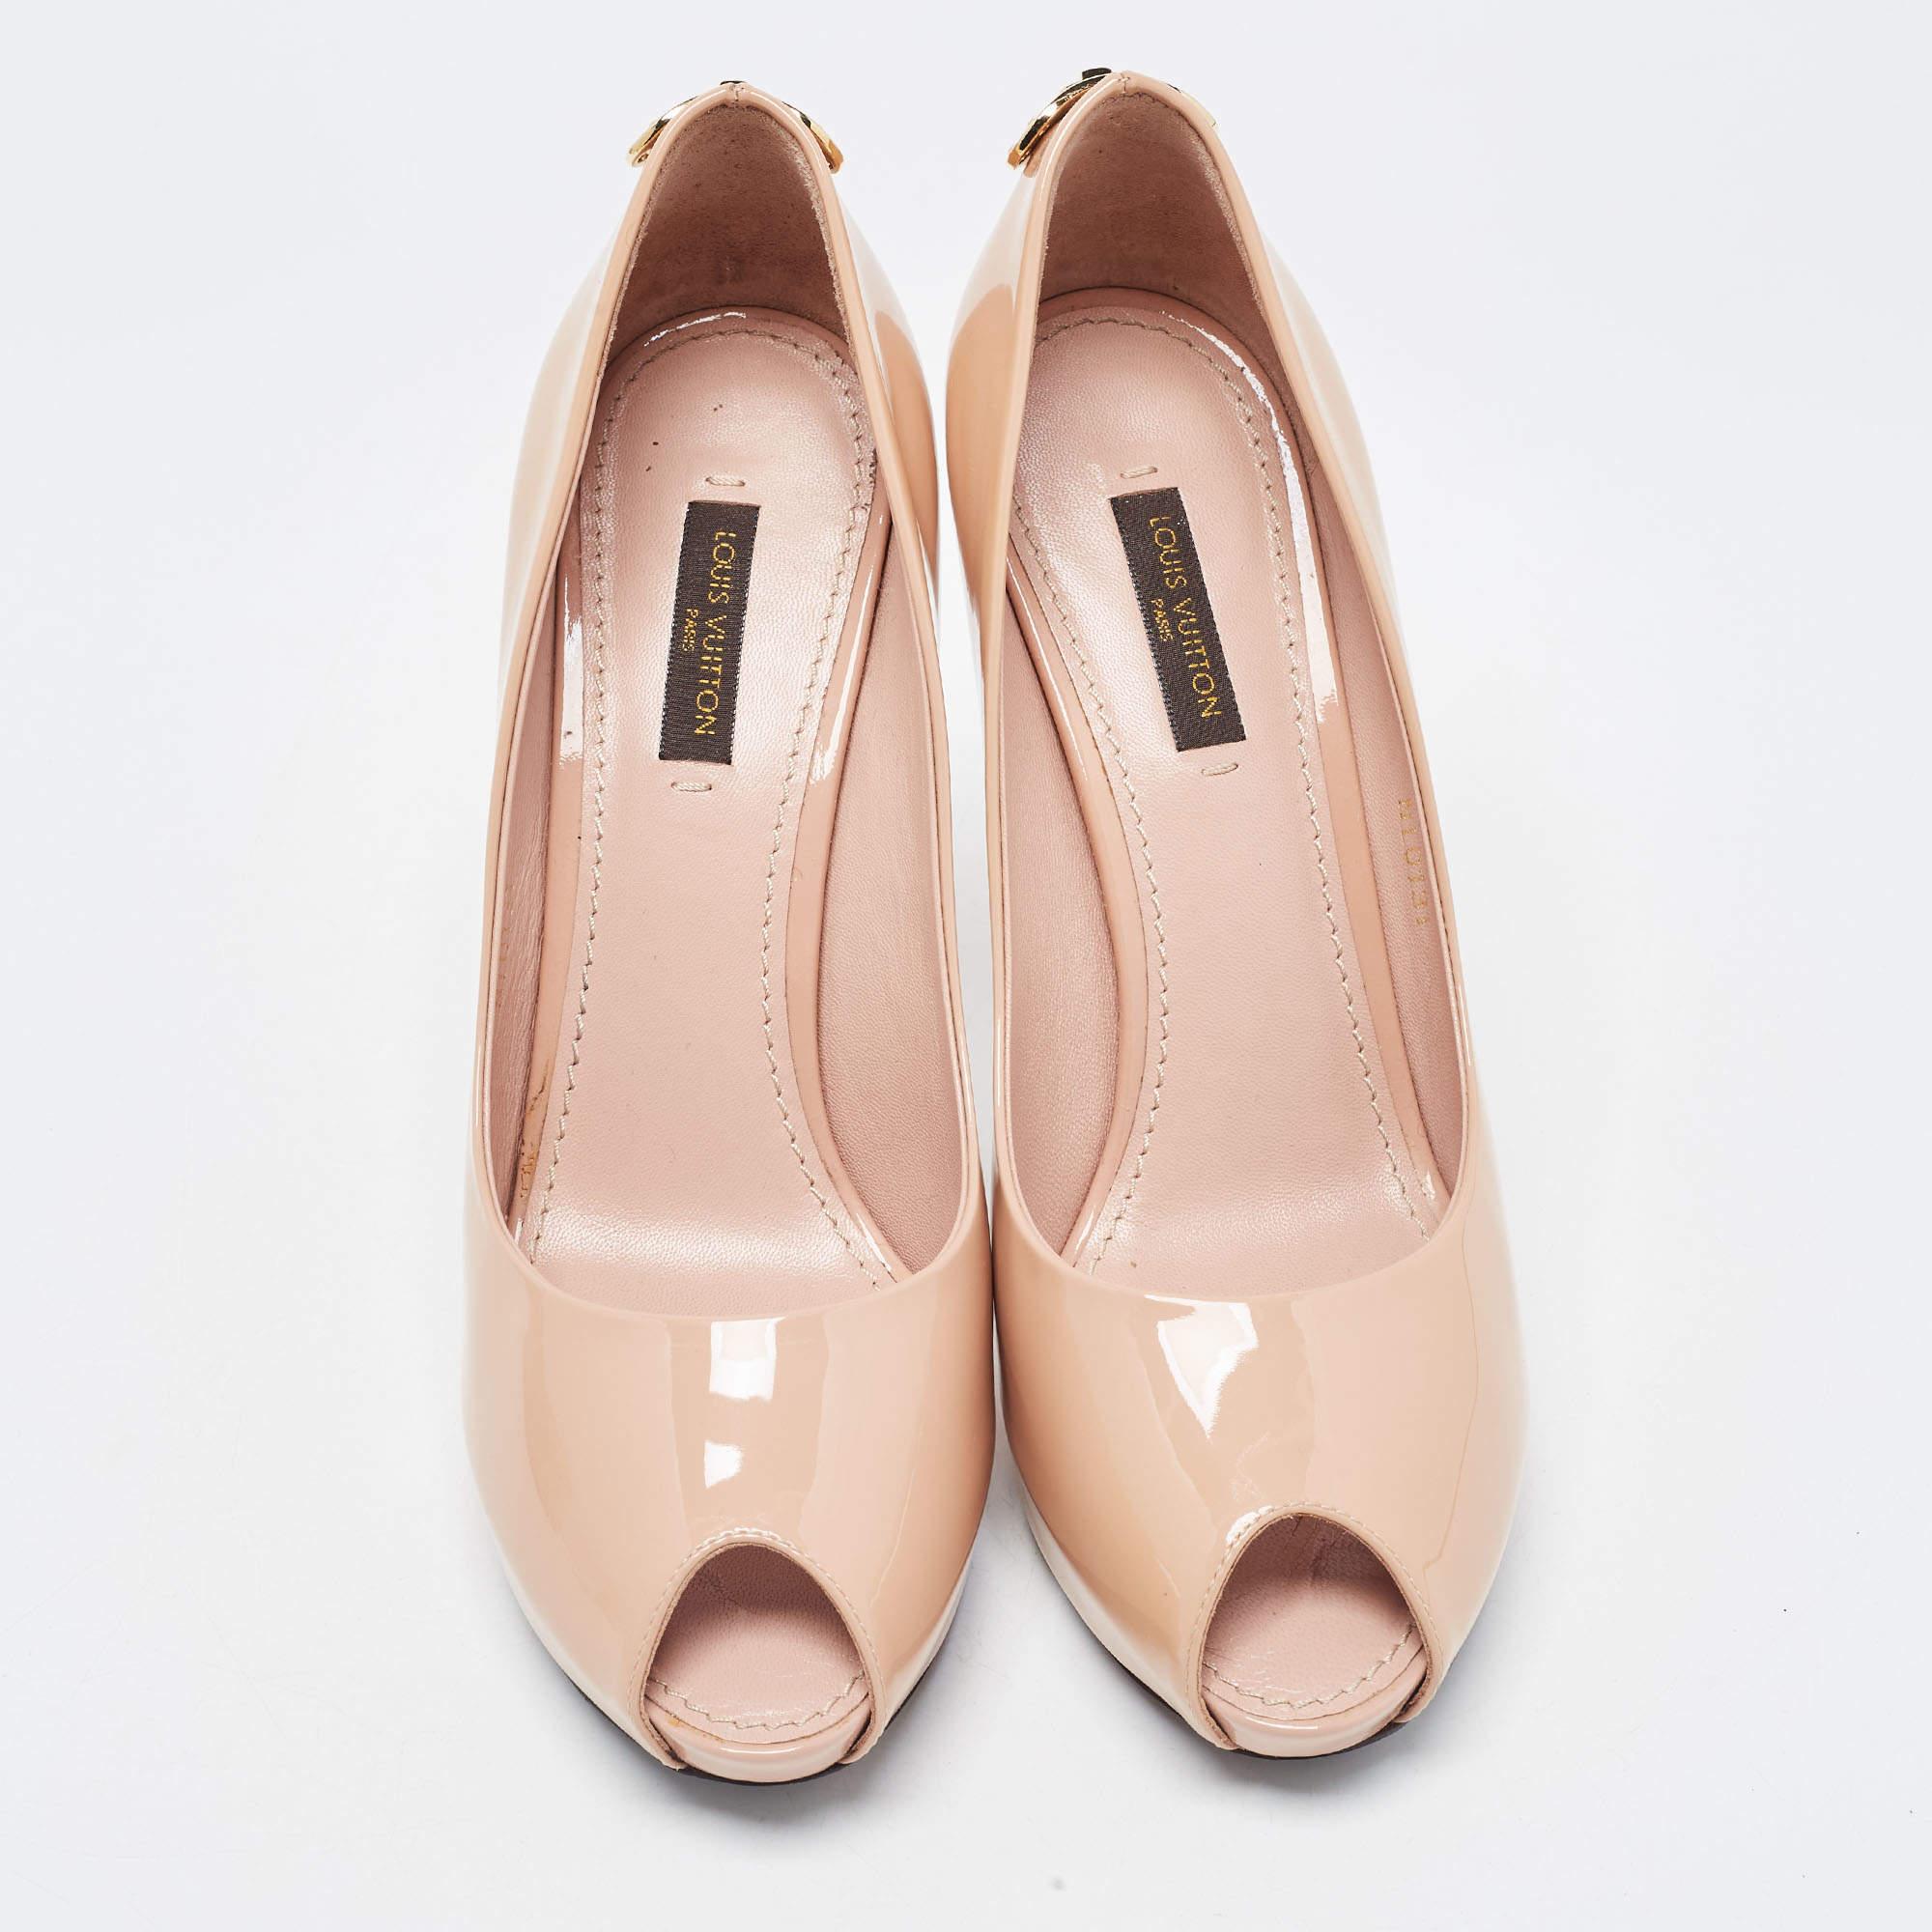 Curvaceous arches, a feminine appeal, and a well-built structure define this set of designer pumps. Coming with comfortable insoles and sleek heels, style them with your favorite outfits.

Includes: Original Dustbag

